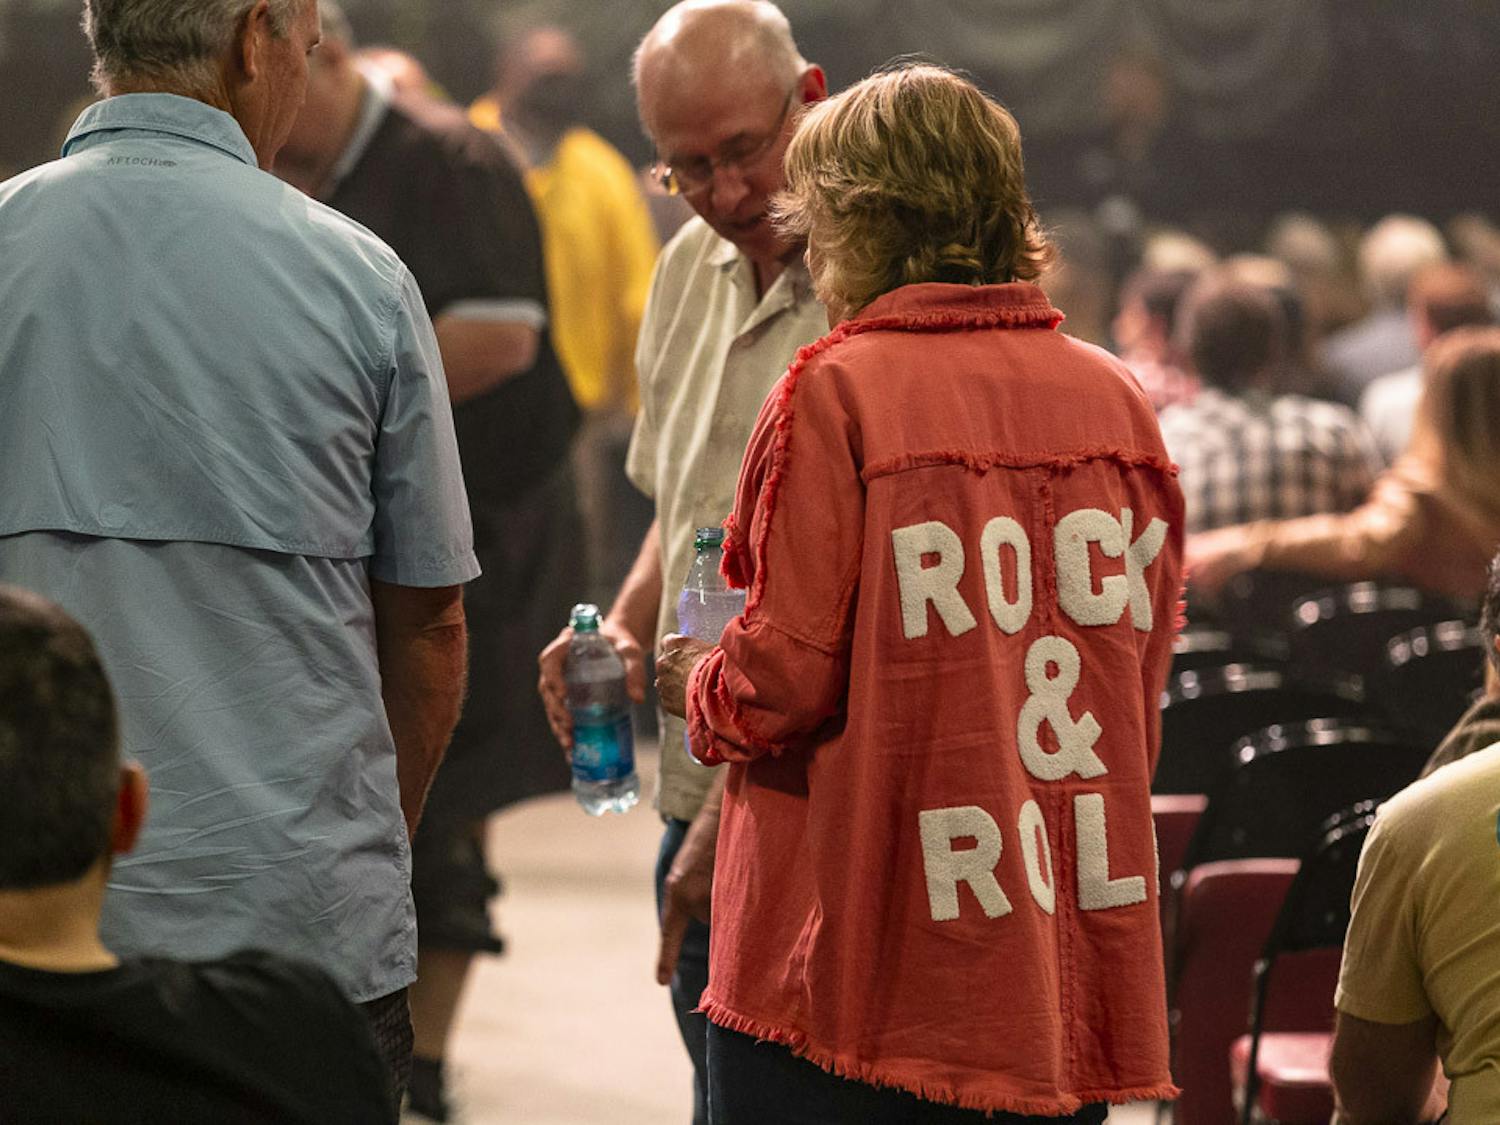 A fan with a jean jacket reading "Rock &amp; Roll" finds her seat prior to the Eagles concert at Colonial Life Arena in Columbia, South Carolina, on March 30, 2023. Fans of all ages attended the event, and the band performed songs from its "Hotel California" album as well as some of its greatest hits.